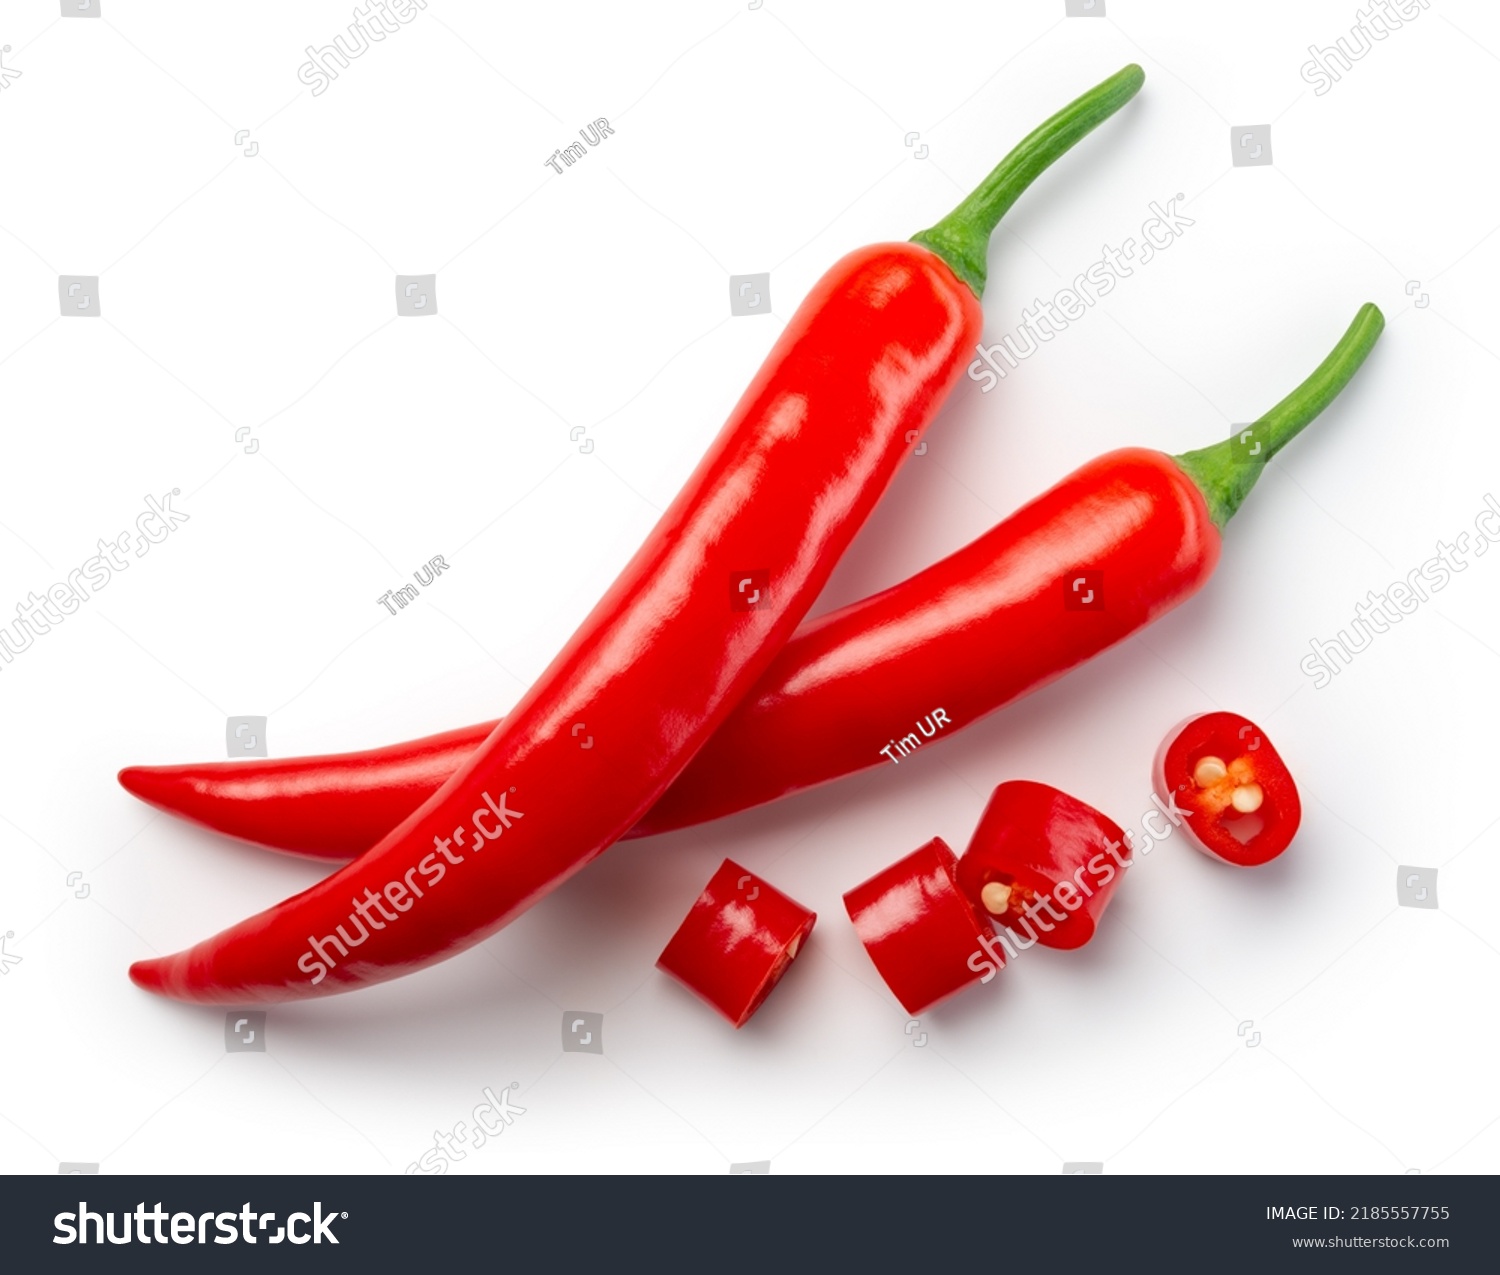 Chili pepper isolated. Chilli top view on white background. Whole and cut red hot chili peppers top. With clipping path. #2185557755